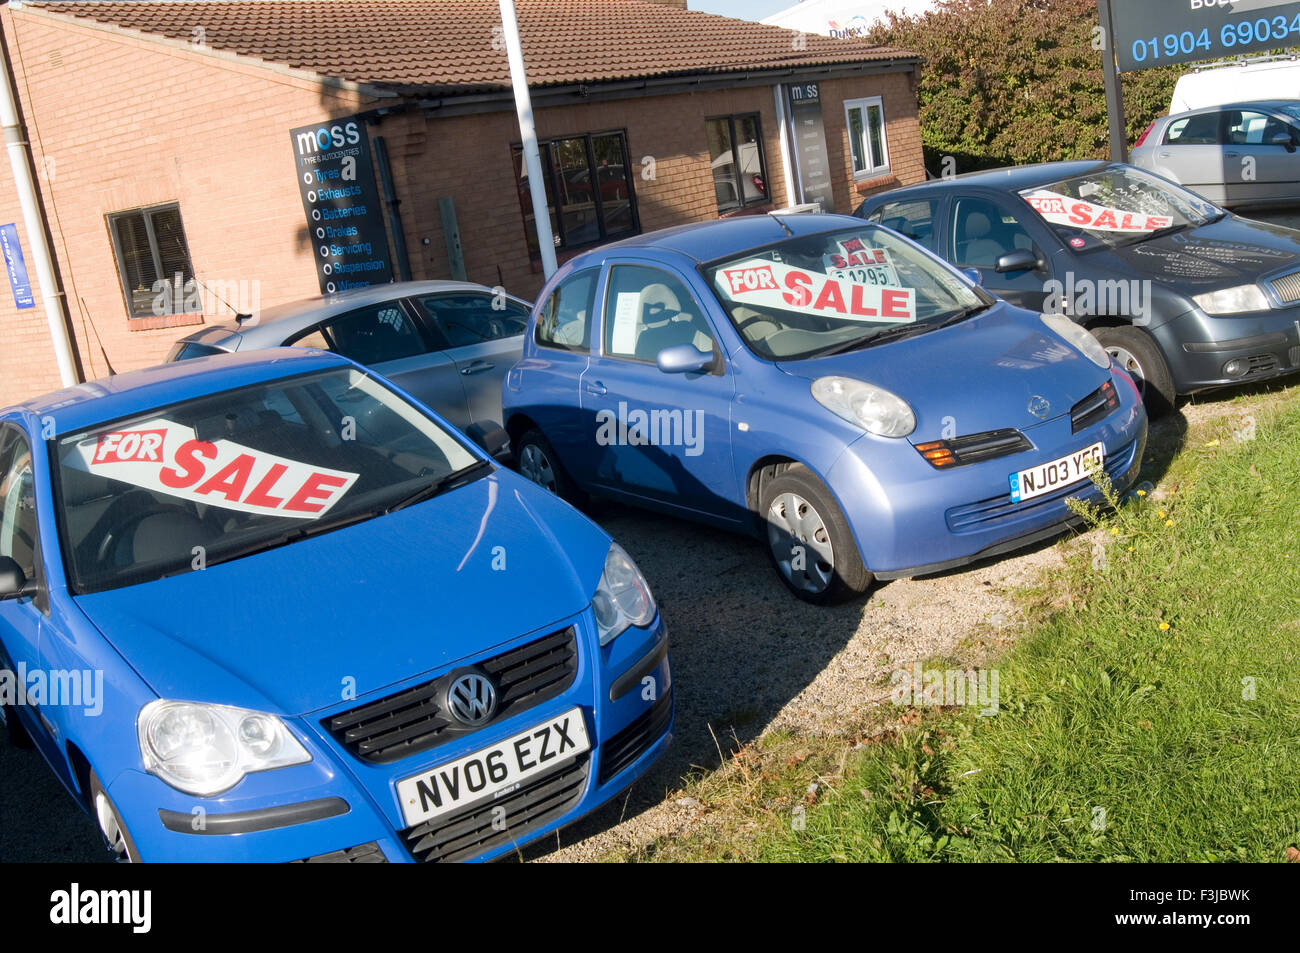 cheap car cars second hand secondhand dodgy car dealers dealer used lot lots Stock Photo